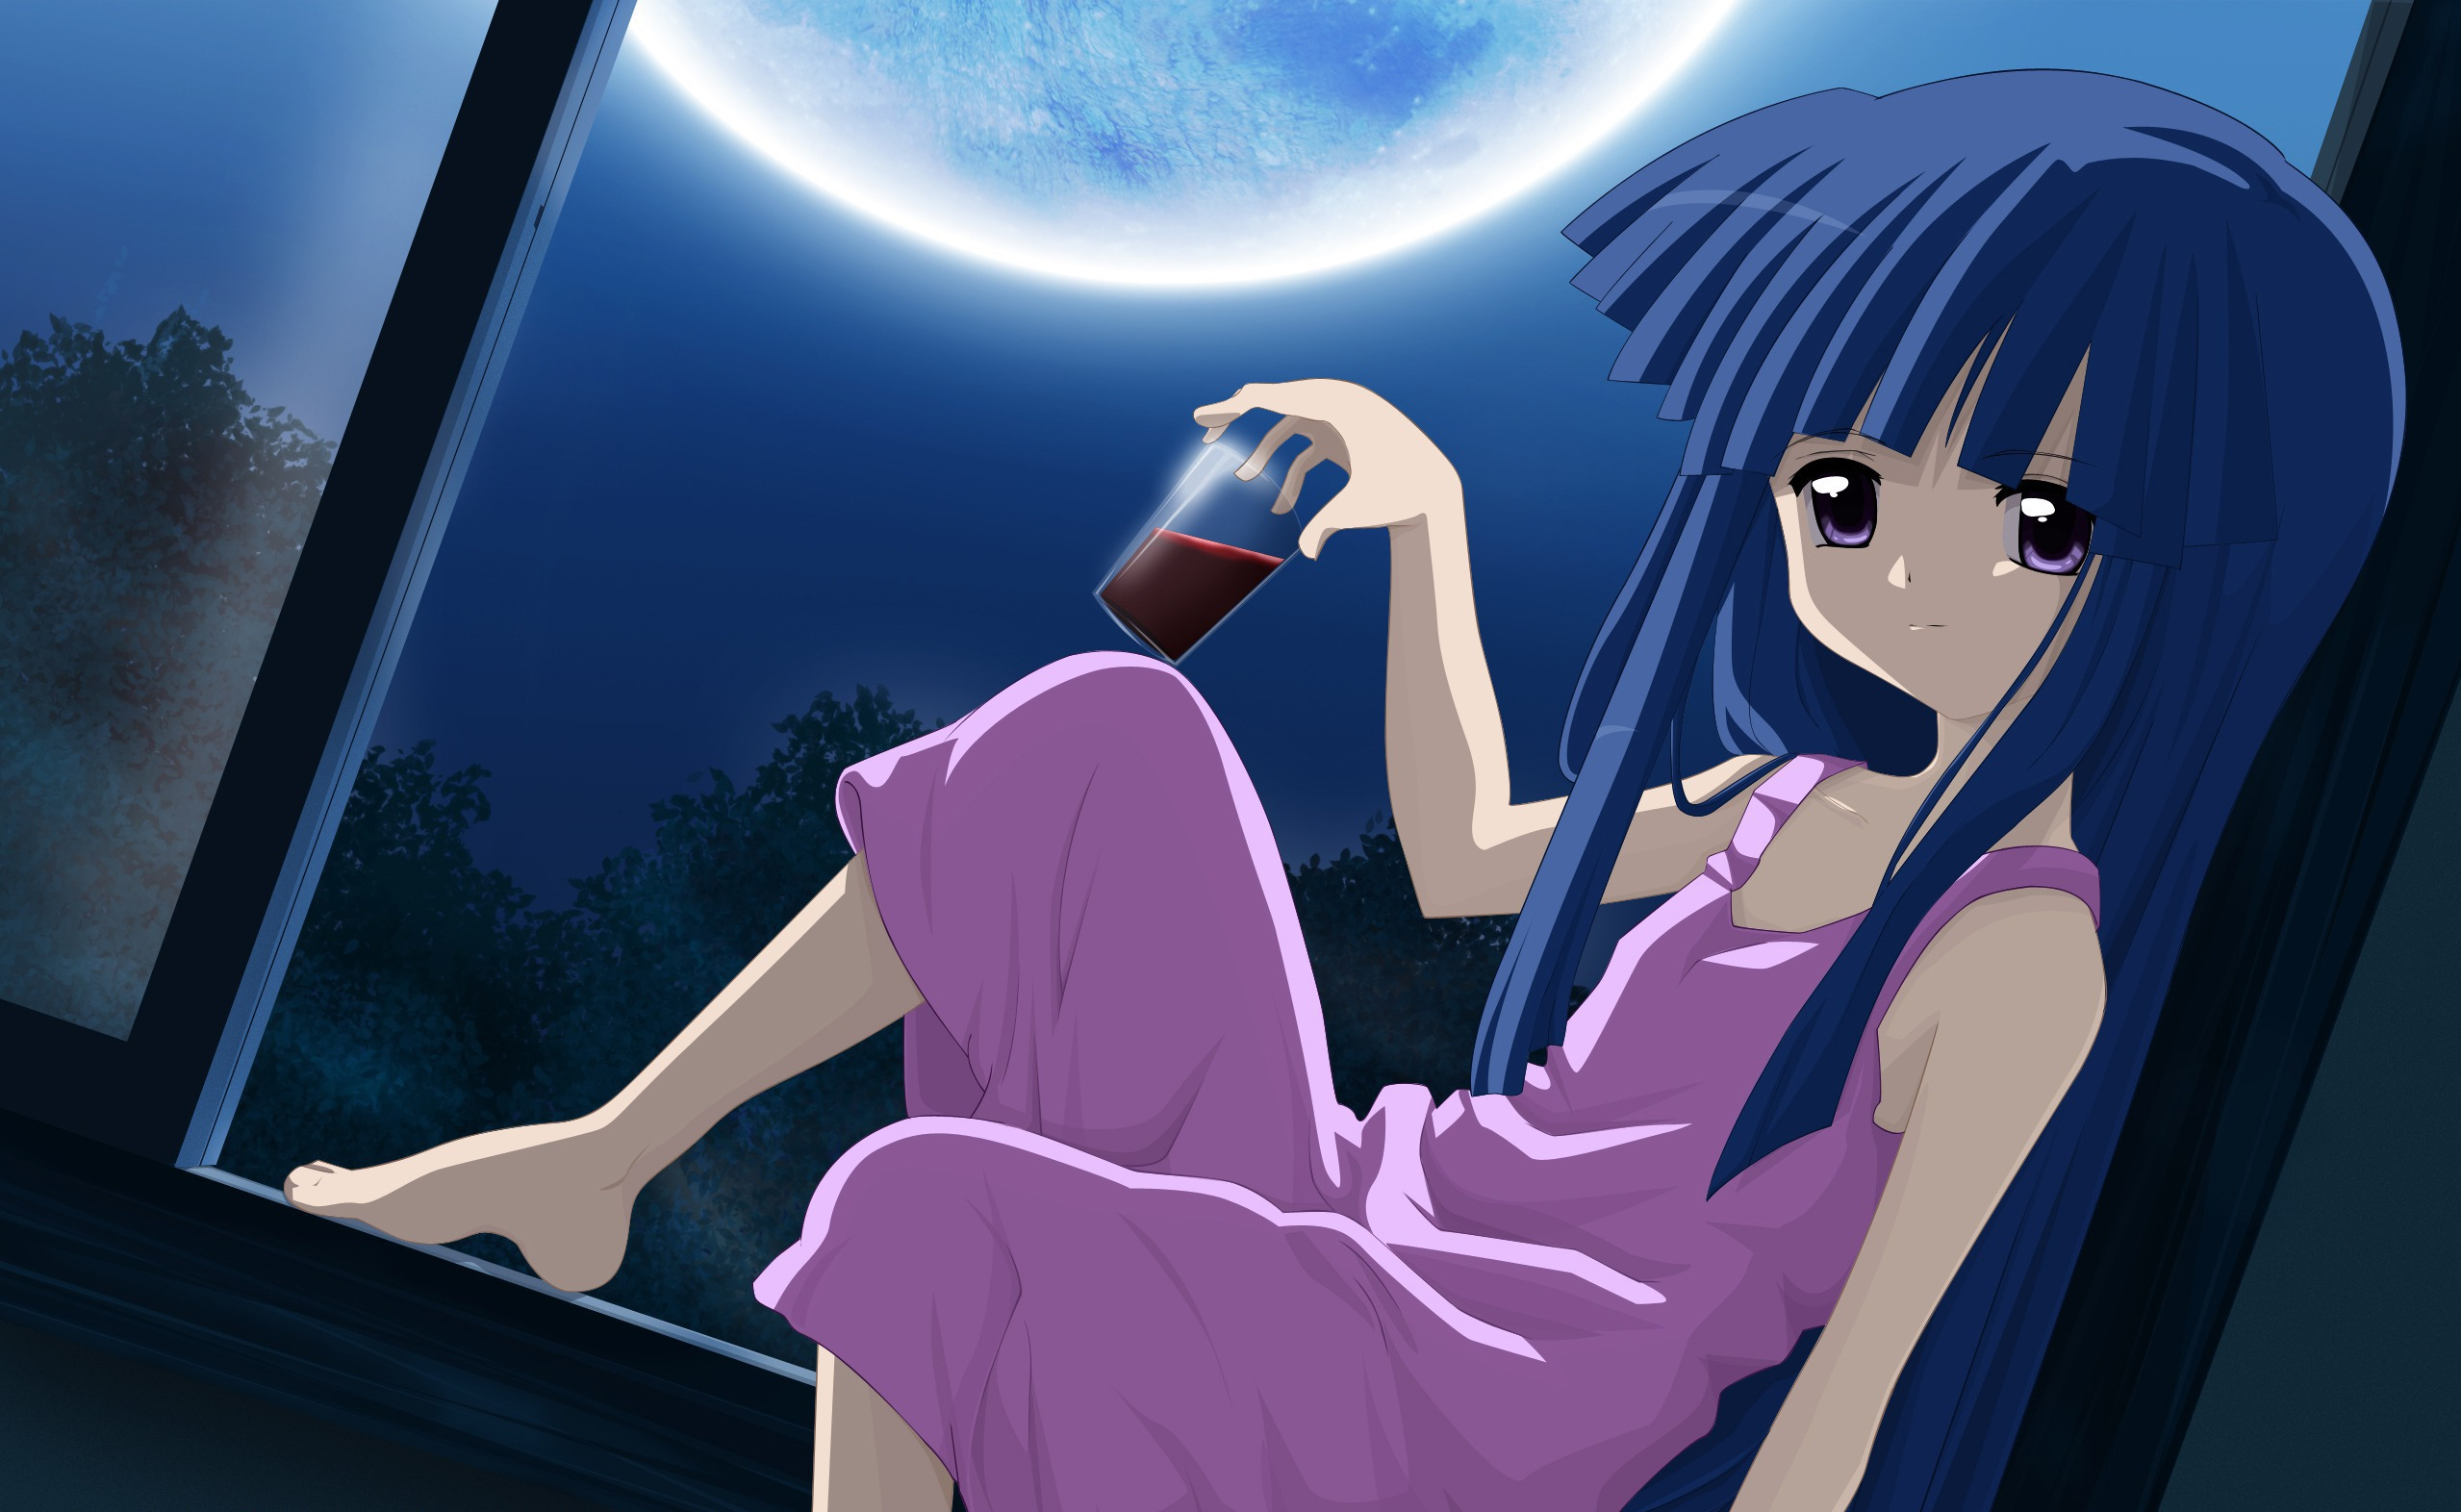 Furude Rika - Anime character from When They Cry series.